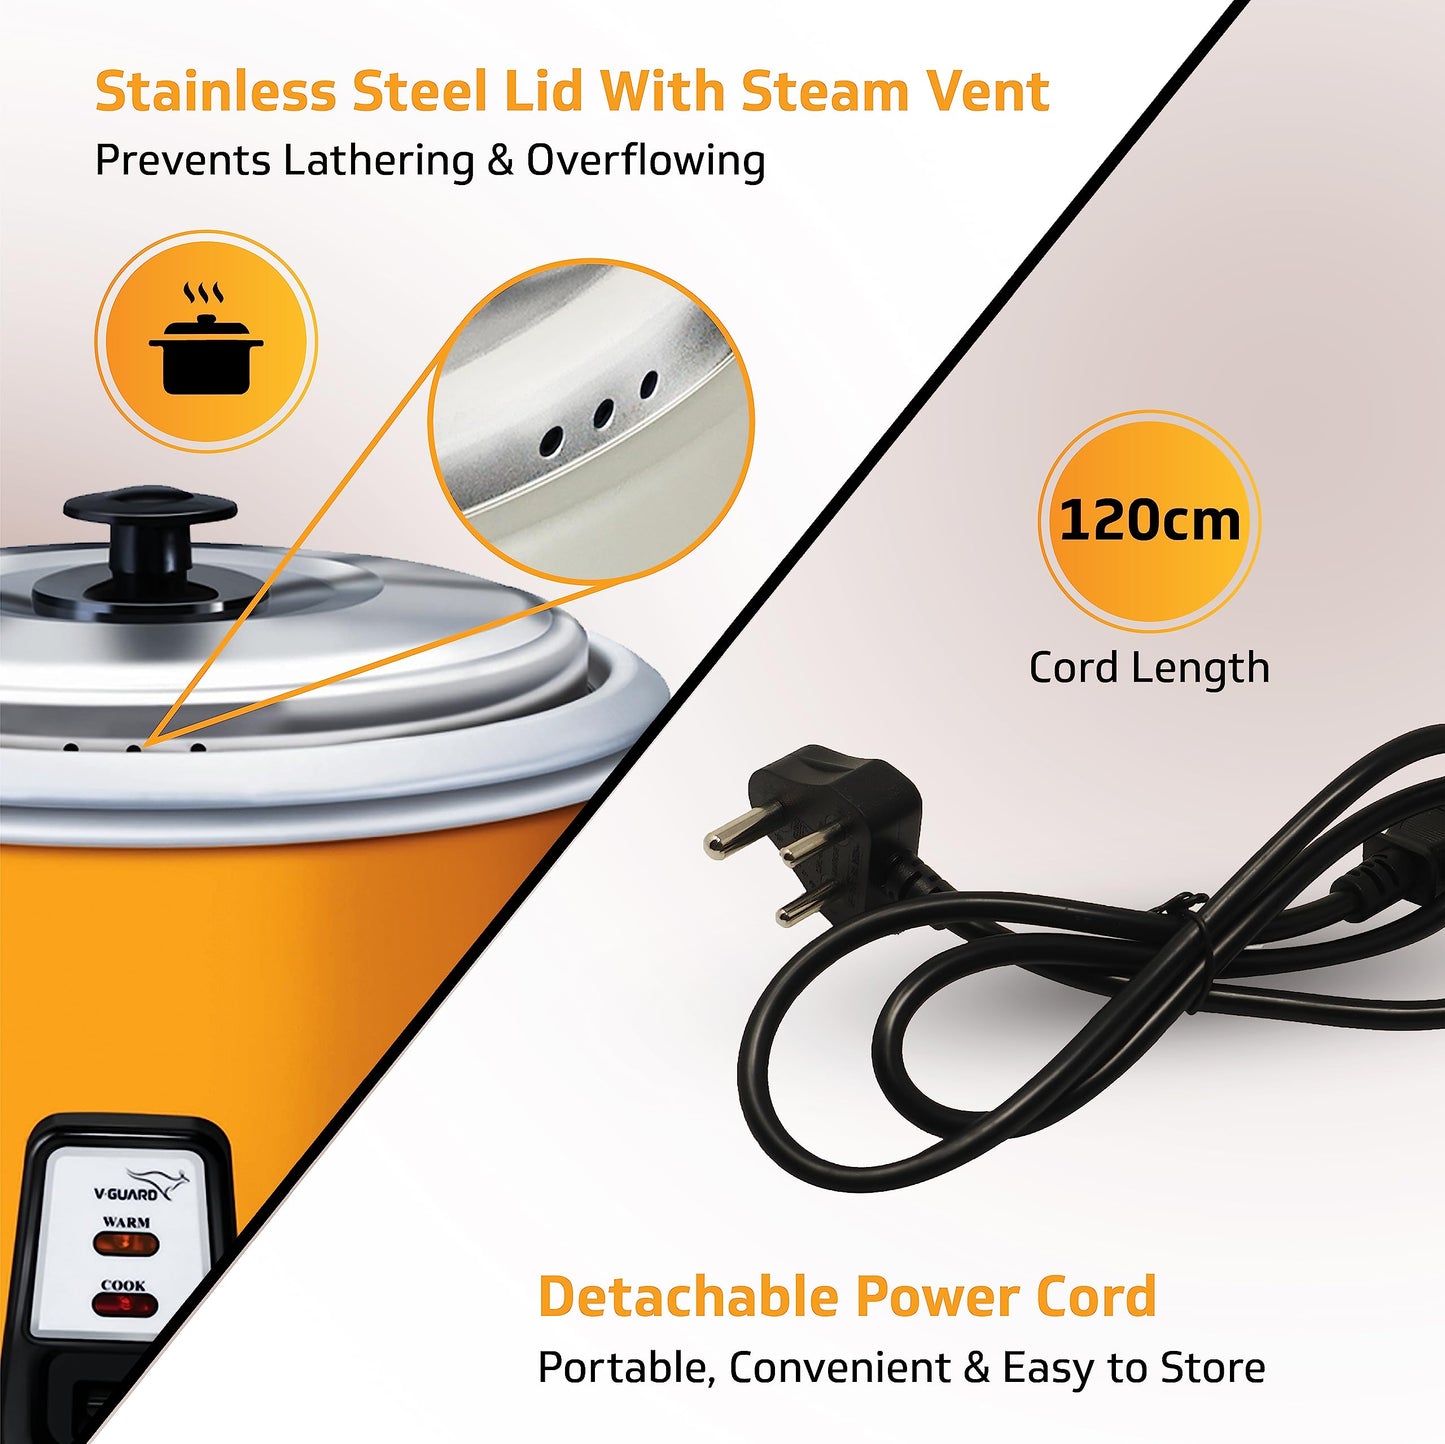 VRCD 1.8 2CB Drum Electric Rice Cooker